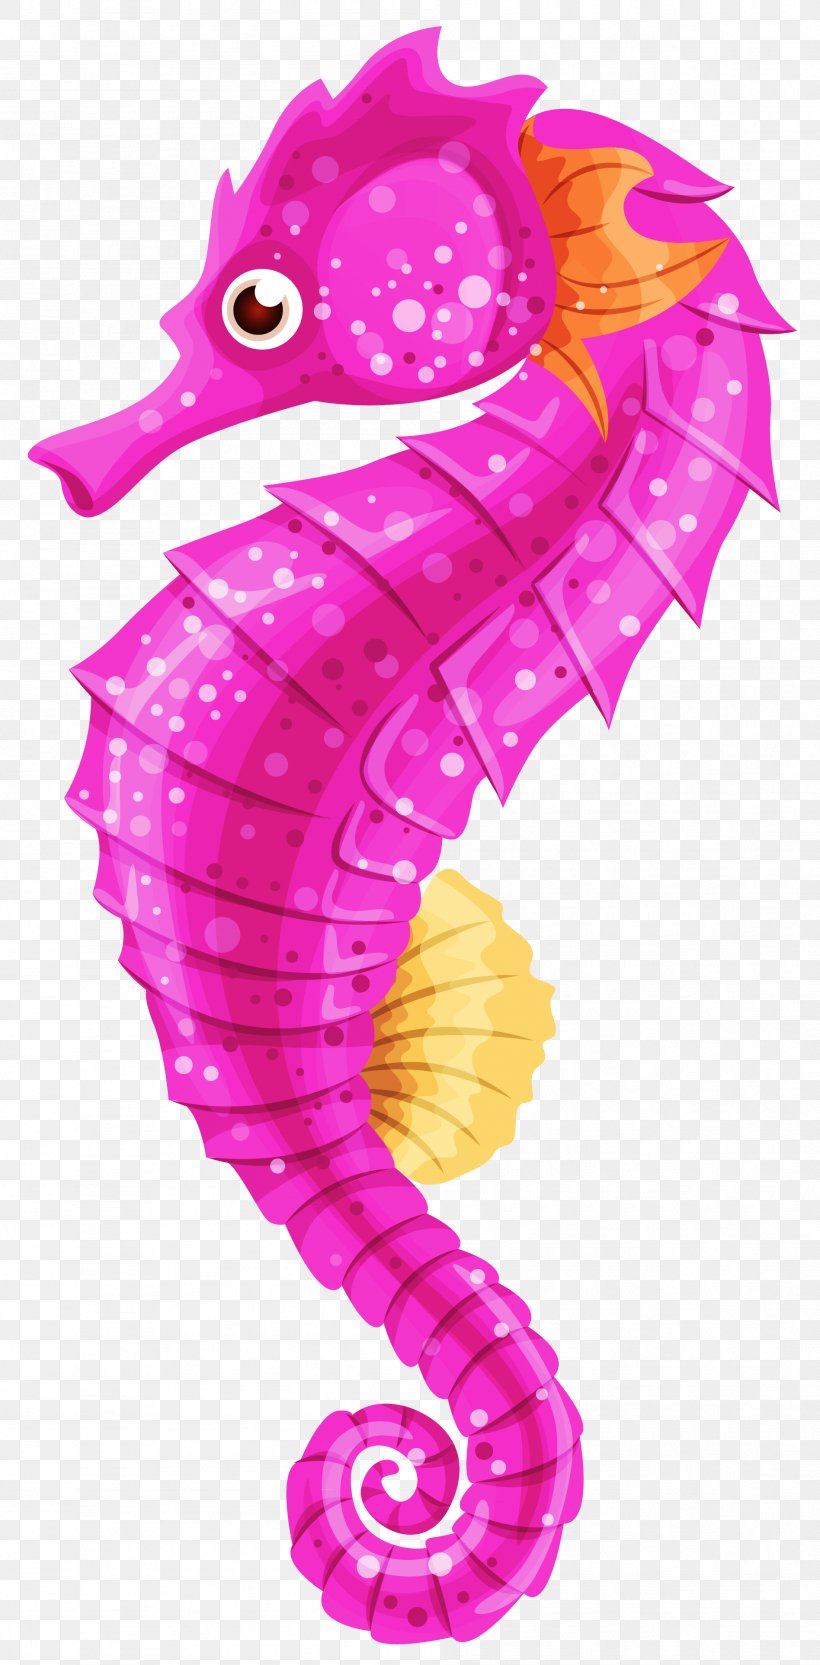 Barbour's Seahorse Big-belly Seahorse Seahorse World Clip Art, PNG, 1896x3851px, Seahorse, Art, Fictional Character, Fish, Illustration Download Free